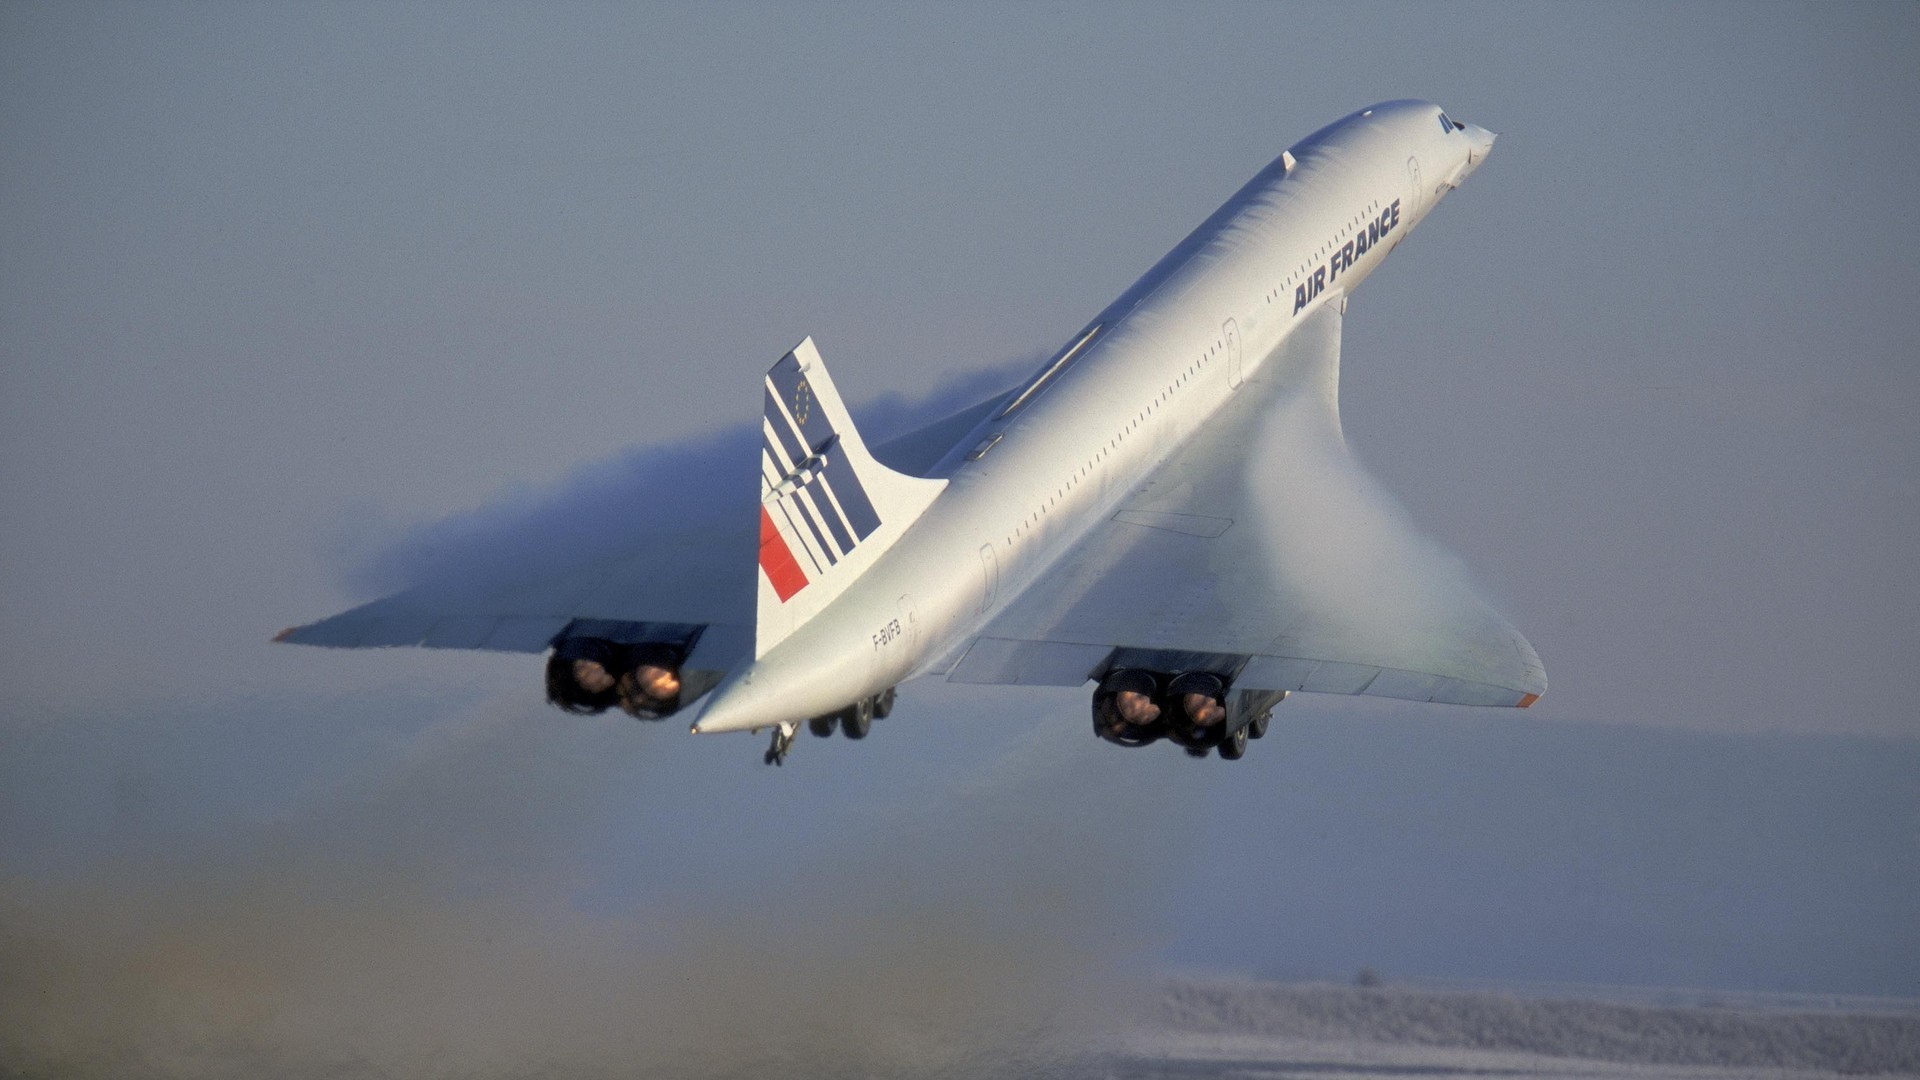 Concorde HD Wallpaper Background Image Id